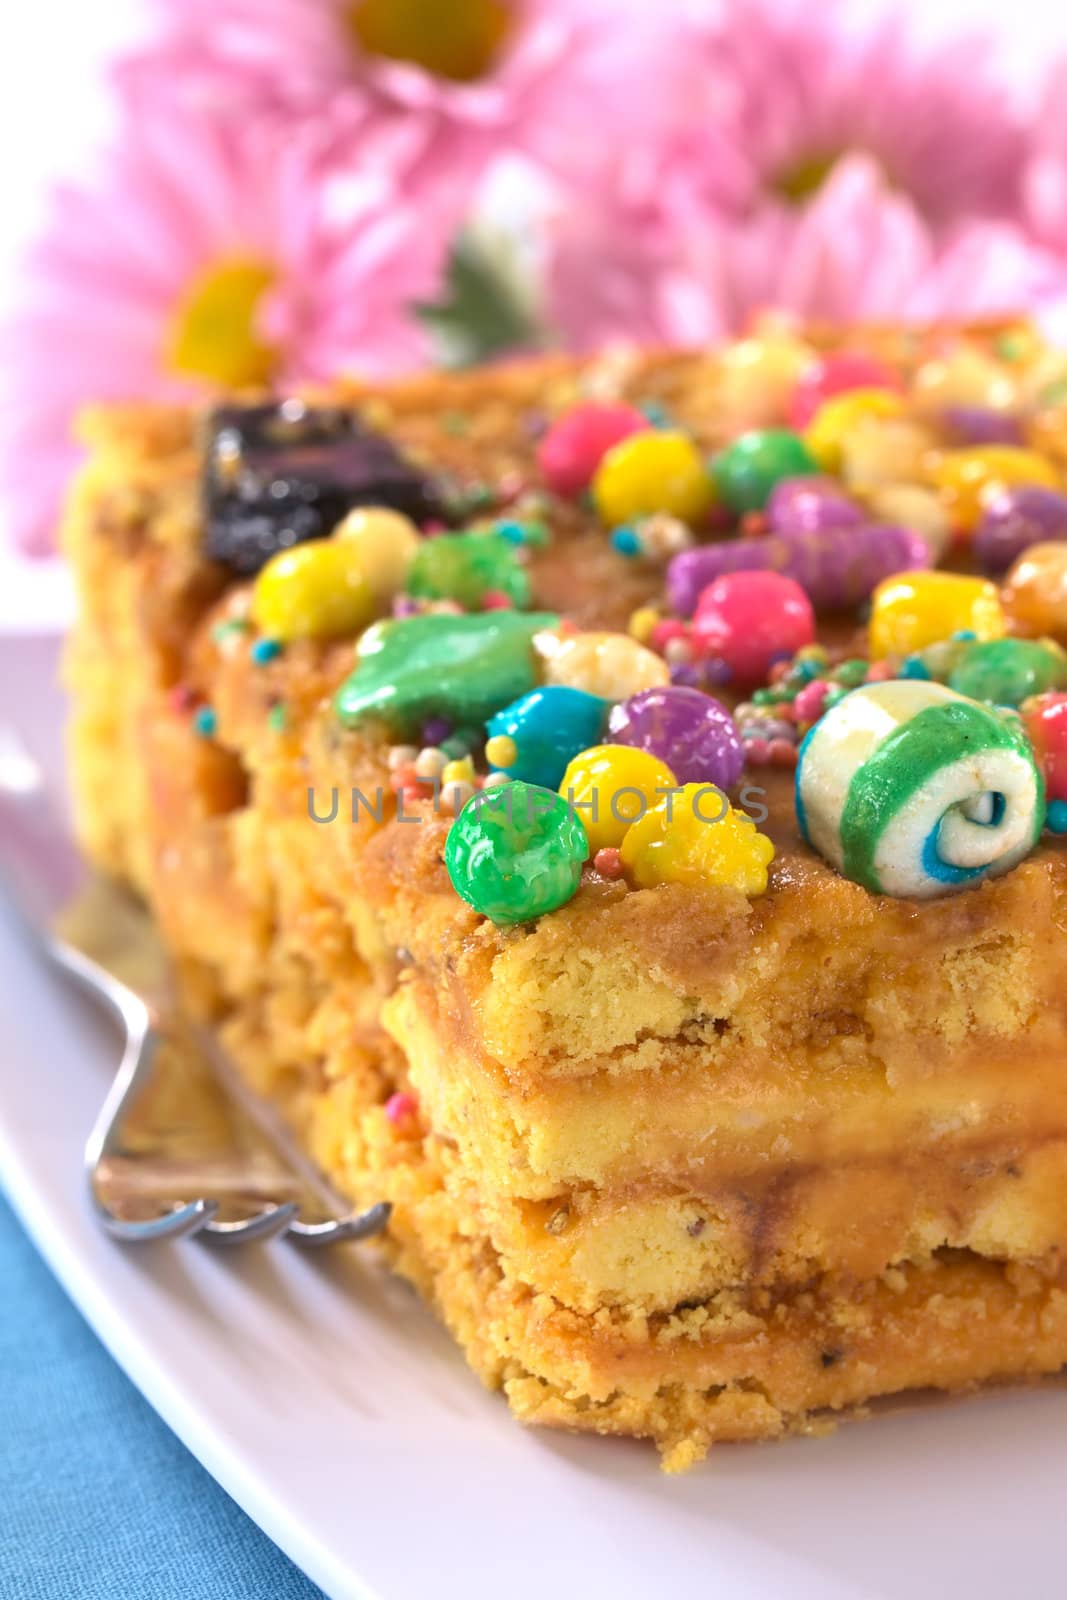 Peruvian colorful cake called Turron flavored with anis, sesame, dried fruits and honey and garnished with colorful sweets on top (Selective Focus, Focus on the front tip and the green ball on top)